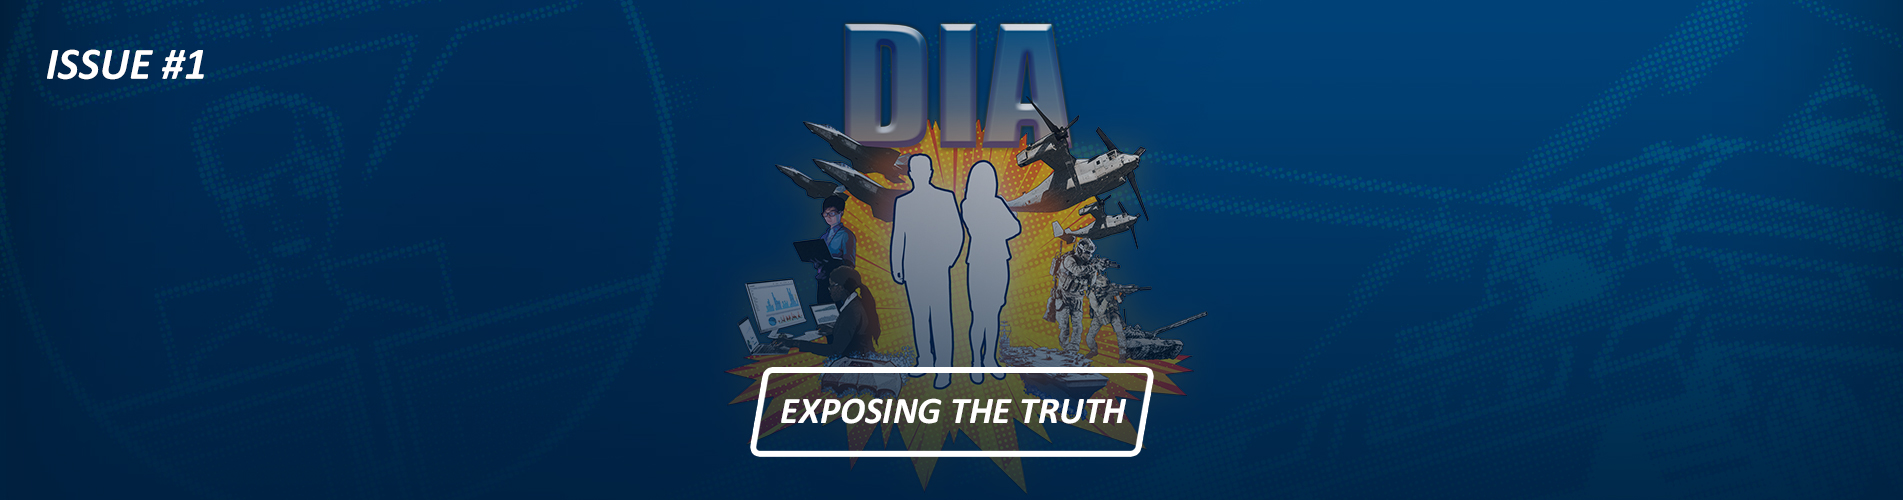 Image showing two silhouettes in front of armed men, military vehicles, a woman on a computer system, and another holding a laptop. Main title. D.I.A. Subtitle. Exposing the truth. Issue number 1.